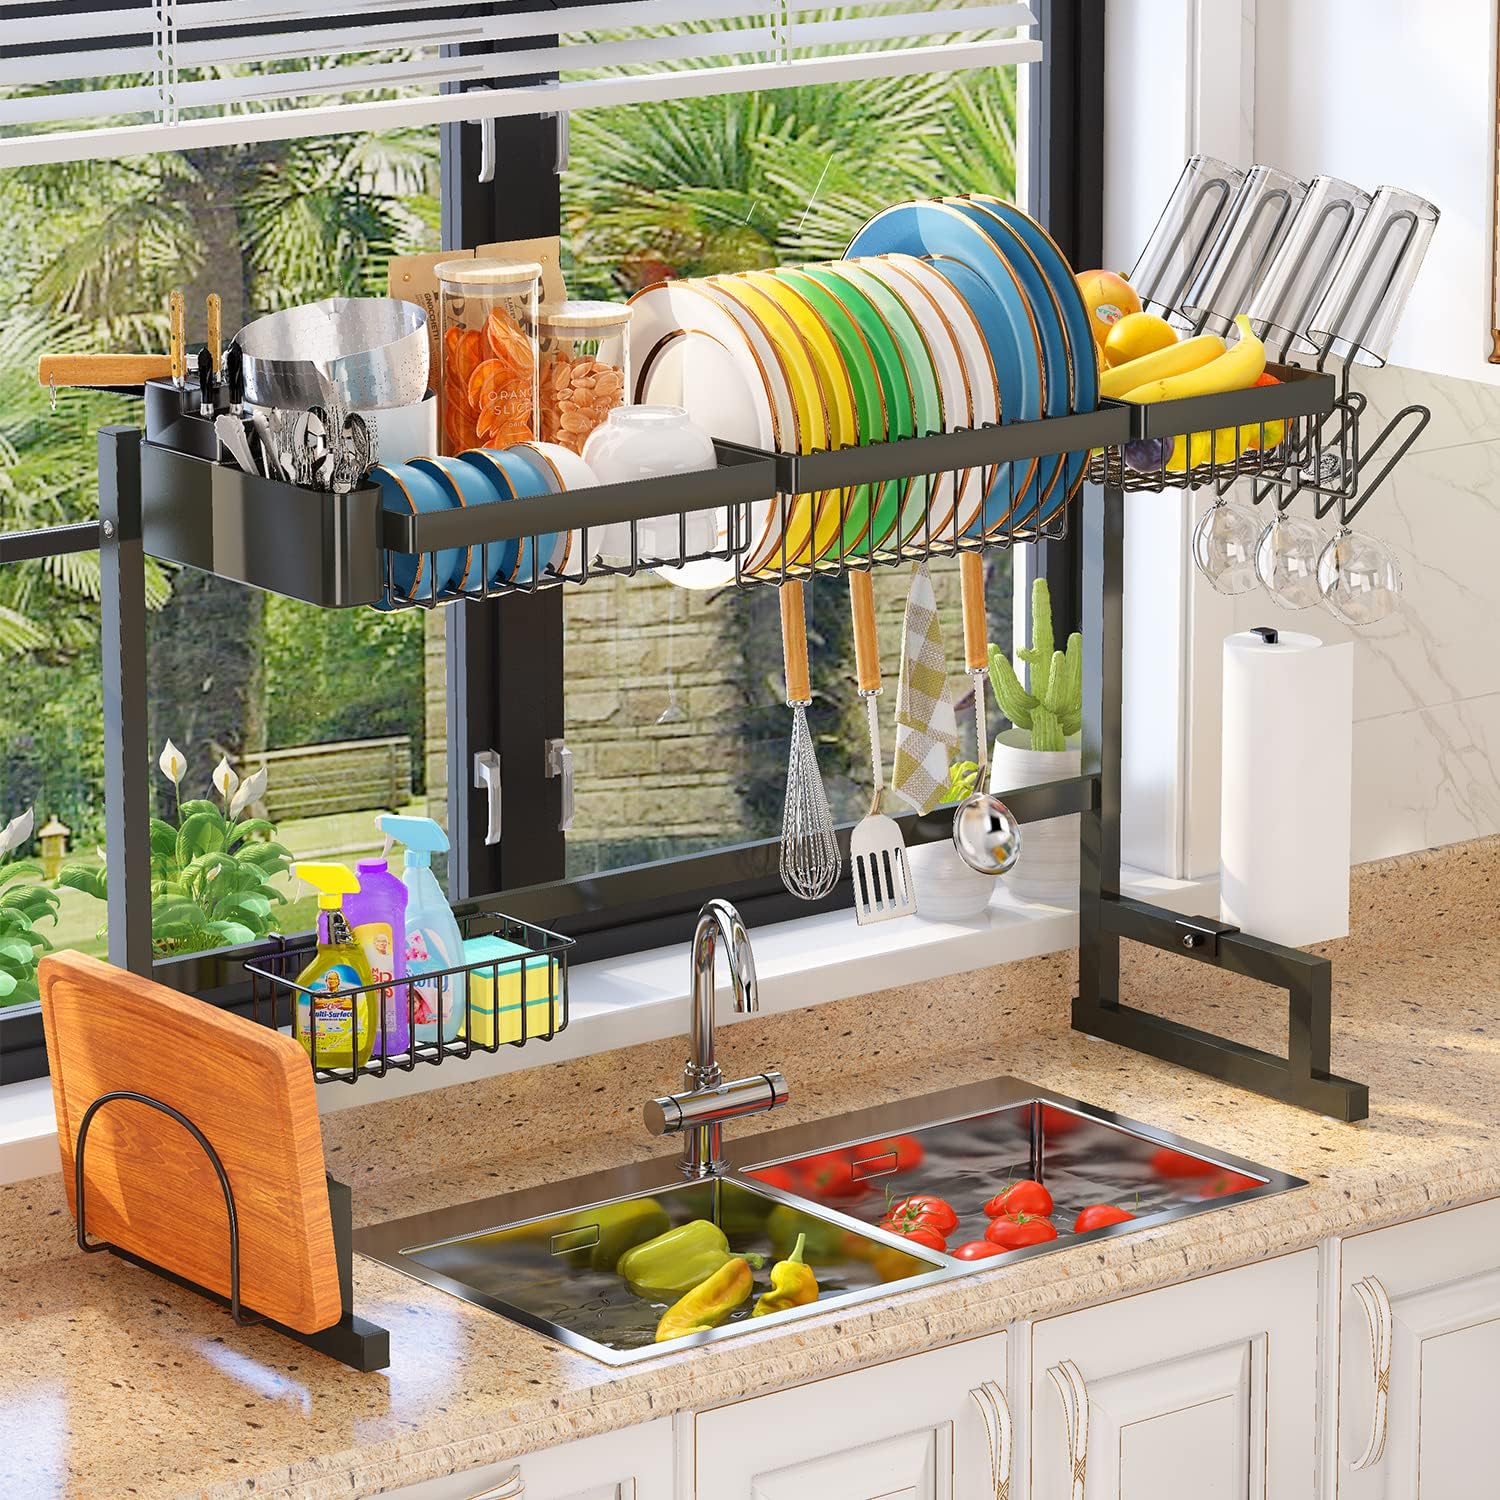 https://bigbigmart.com/wp-content/uploads/2023/10/ADBIU-Over-The-Sink-Dish-Drying-Rack-Expandable-Height-and-Length-Snap-On-Design-2-Tier-Large-Dish-Rack-Stainless-Steel-24-35.5L-x-12.1W-x-19-22H.jpg